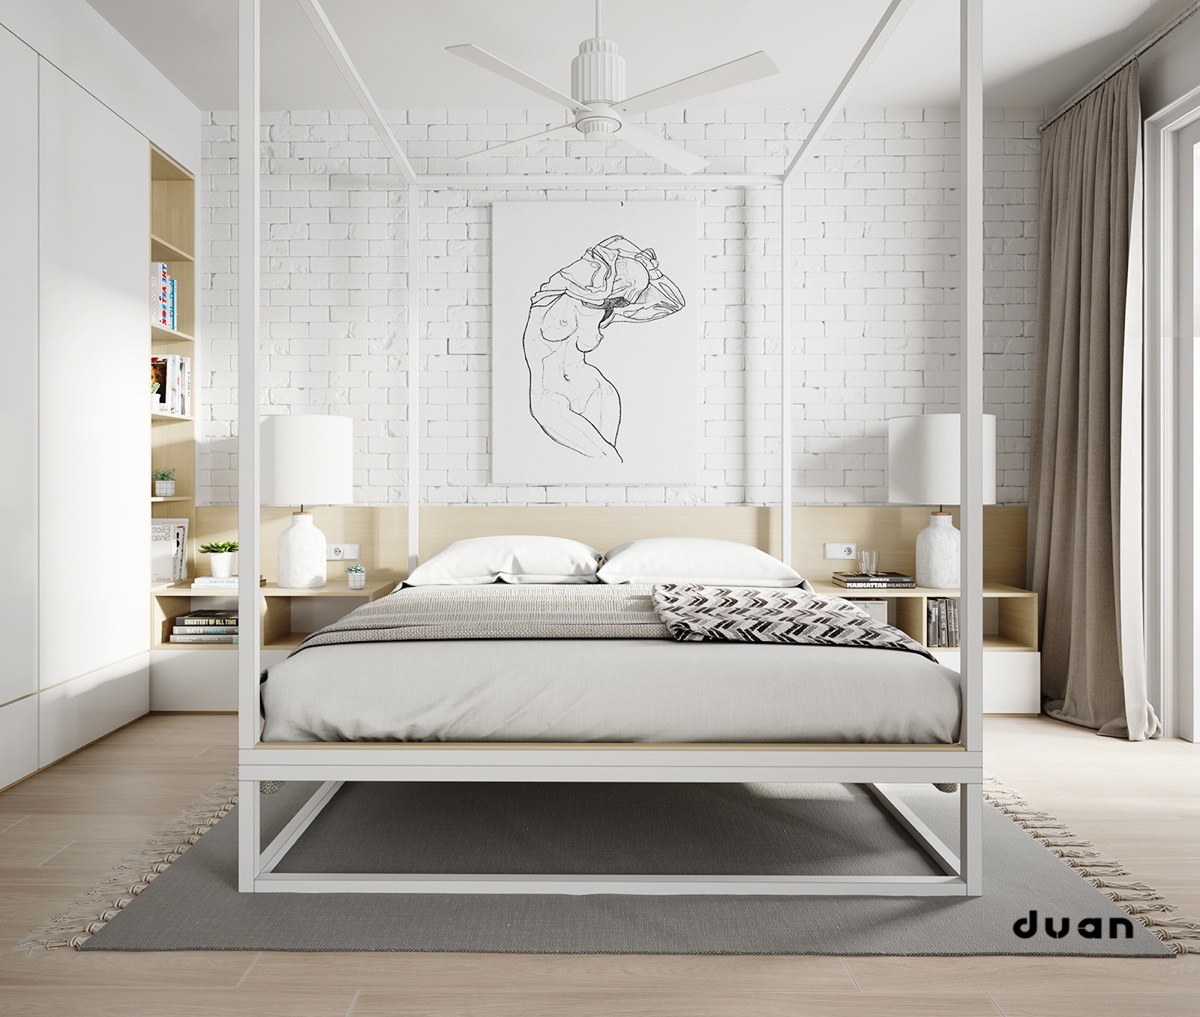 Beautiful white bedroom with headboards "width =" 1200 "height =" 1017 "srcset =" https://mileray.com/wp-content/uploads/2020/05/1588508098_597_Serenely-Gorgeous-Bedroom-Decor-Ideas-Which-Decorated-With-a-Perfect.jpg 1200w, https: // myfashionos. com / wp-content / uploads / 2016/12 / Duan-1-300x254.jpg 300w, https://mileray.com/wp-content/uploads/2016/12/Duan-1-768x651.jpg 768w, https: //mileray.com/wp-content/uploads/2016/12/Duan-1-1024x868.jpg 1024w, https://mileray.com/wp-content/uploads/2016/12/Duan-1-696x590.jpg 696w, https://mileray.com/wp-content/uploads/2016/12/Duan-1-1068x905.jpg 1068w, https://mileray.com/wp-content/uploads/2016/12/Duan-1 -496x420.jpg 496w "sizes =" (maximum width: 1200px) 100vw, 1200px